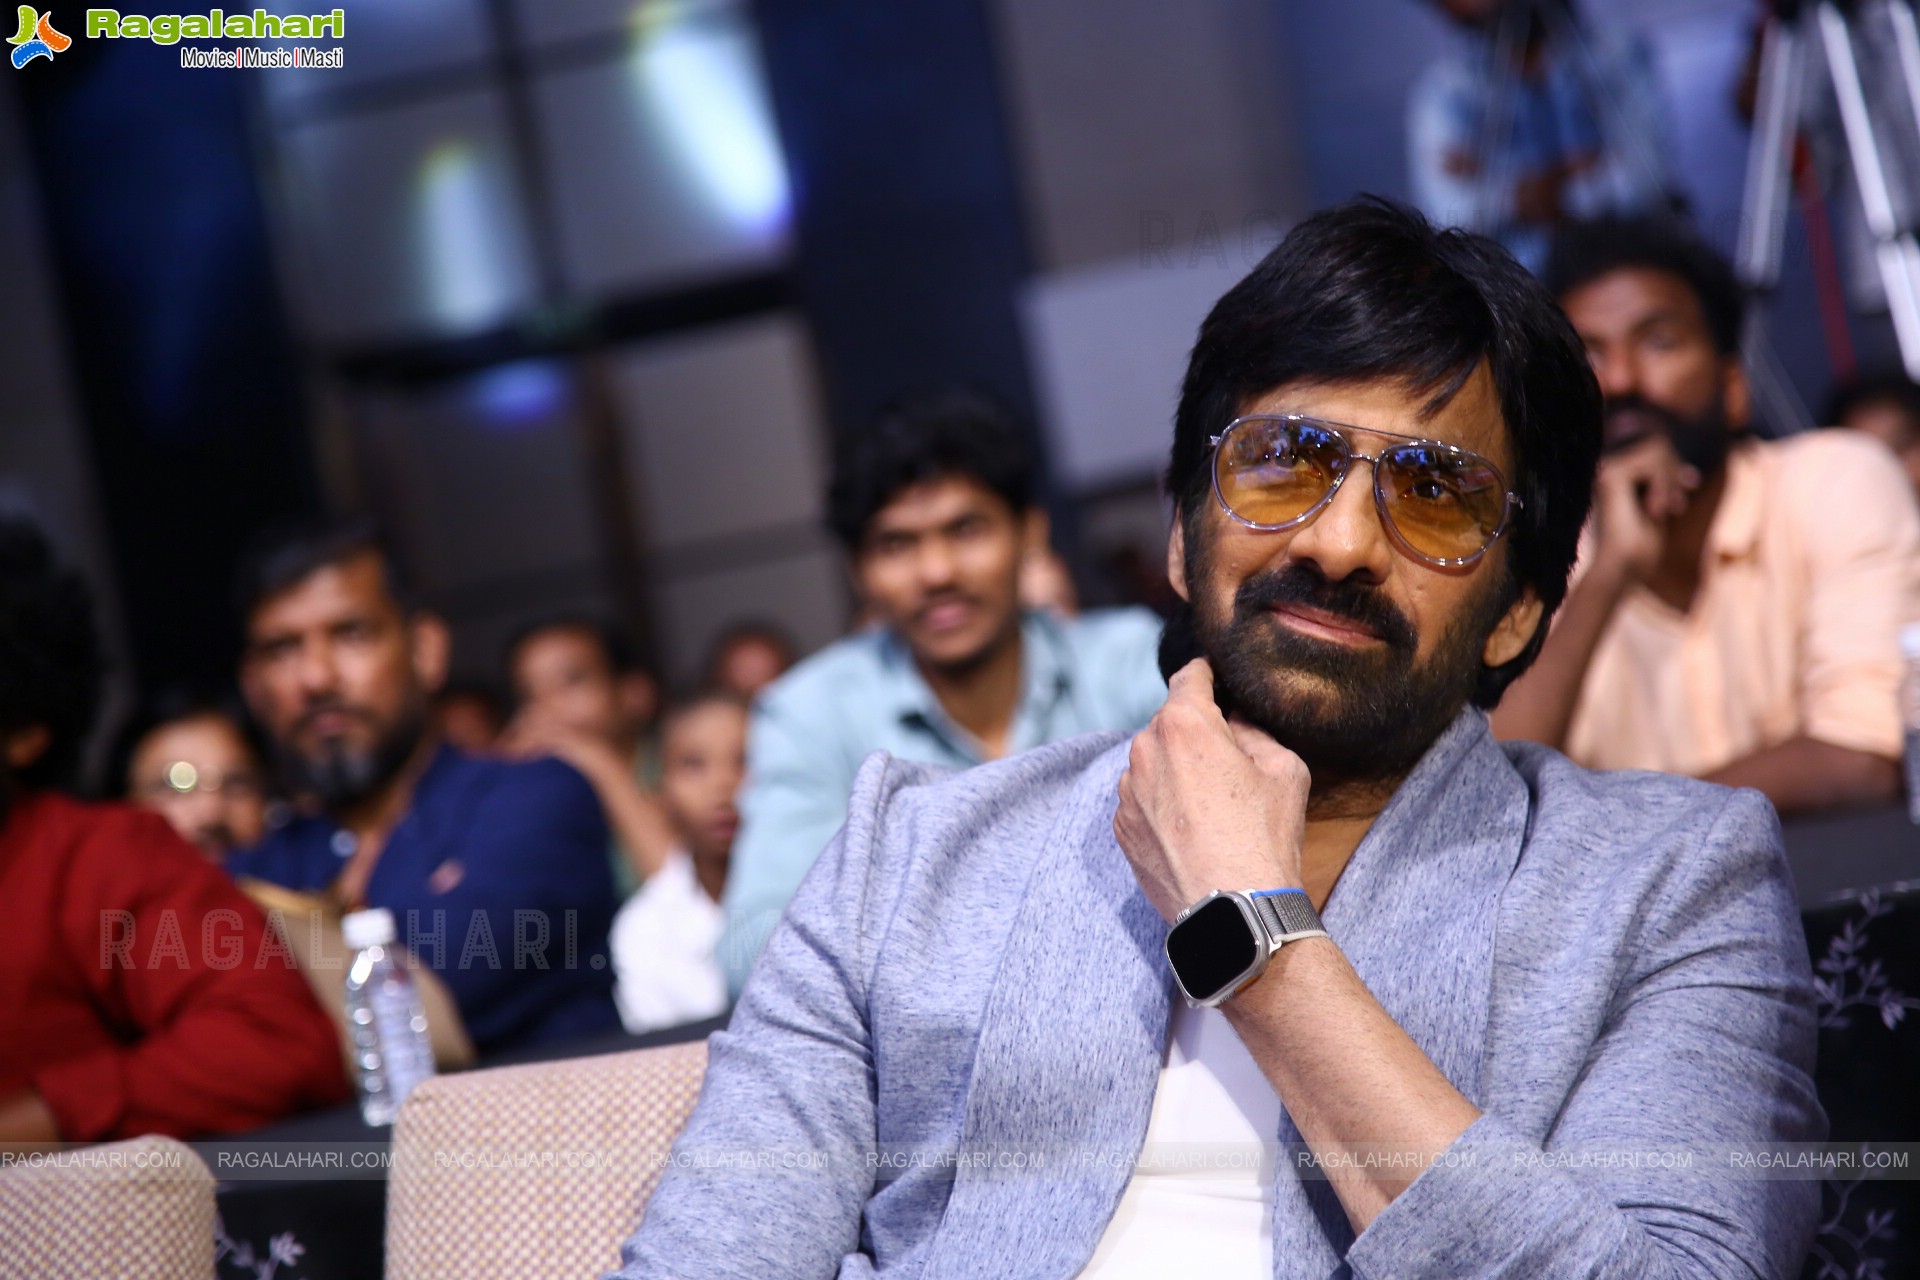 Ravi Teja at Dhamaka Movie Pre-Release Event, HD Photo Gallery